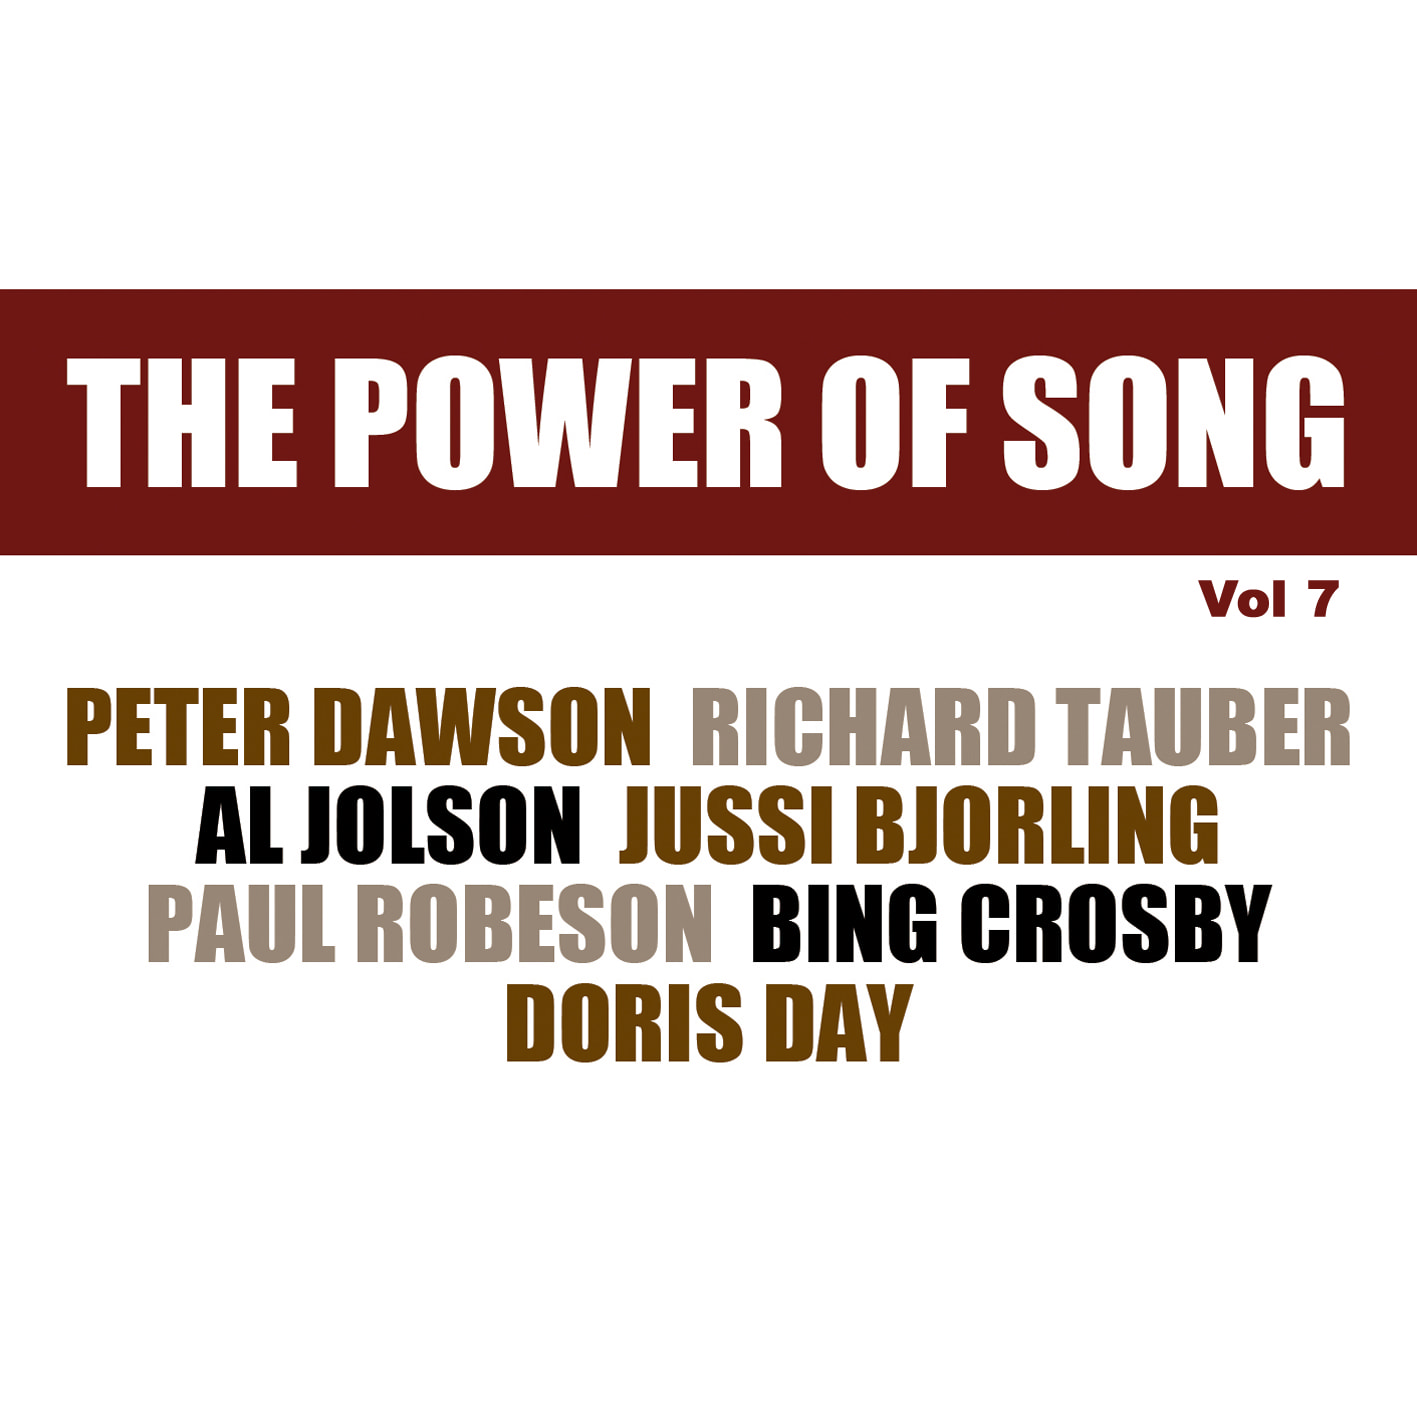 The Power of Song Vol 7